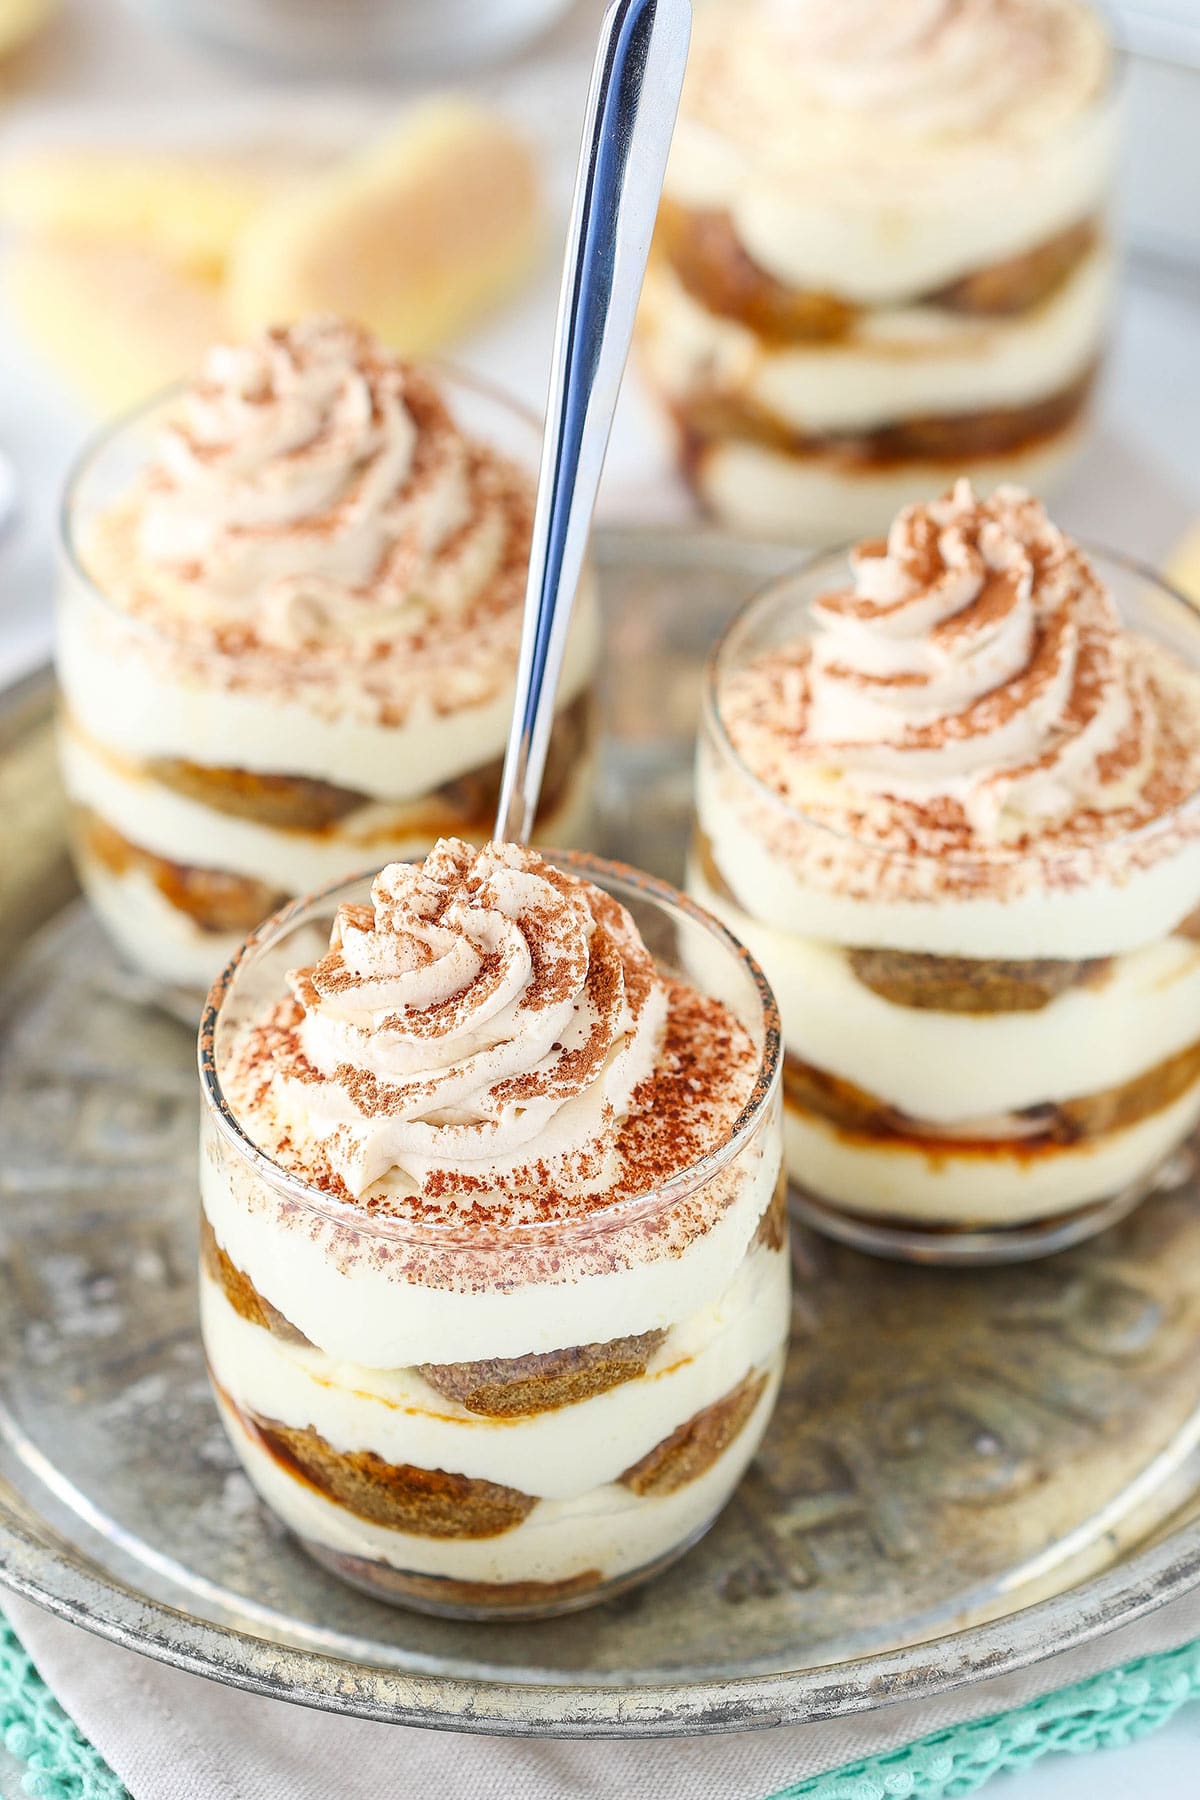 Three tiramisu trifles on a metal plate with a spoon inside one of them